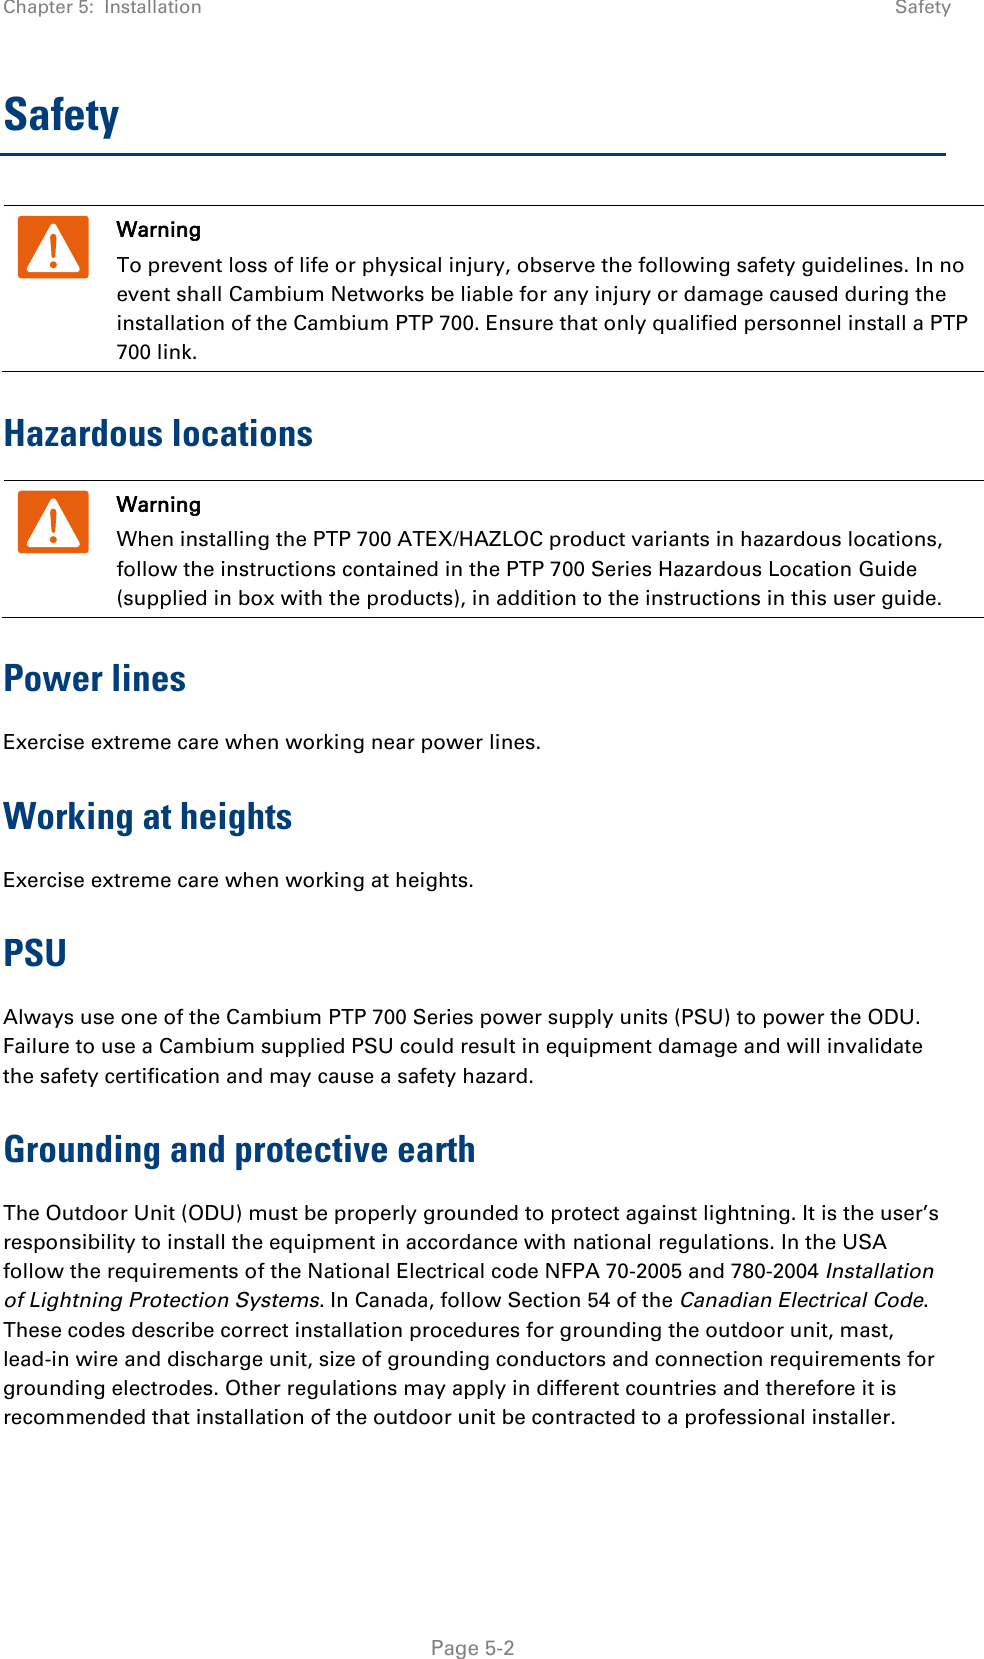 Chapter 5:  Installation  Safety  Safety  Warning To prevent loss of life or physical injury, observe the following safety guidelines. In no event shall Cambium Networks be liable for any injury or damage caused during the installation of the Cambium PTP 700. Ensure that only qualified personnel install a PTP 700 link. Hazardous locations  Warning When installing the PTP 700 ATEX/HAZLOC product variants in hazardous locations, follow the instructions contained in the PTP 700 Series Hazardous Location Guide (supplied in box with the products), in addition to the instructions in this user guide. Power lines Exercise extreme care when working near power lines. Working at heights Exercise extreme care when working at heights. PSU Always use one of the Cambium PTP 700 Series power supply units (PSU) to power the ODU. Failure to use a Cambium supplied PSU could result in equipment damage and will invalidate the safety certification and may cause a safety hazard. Grounding and protective earth The Outdoor Unit (ODU) must be properly grounded to protect against lightning. It is the user’s responsibility to install the equipment in accordance with national regulations. In the USA follow the requirements of the National Electrical code NFPA 70-2005 and 780-2004 Installation of Lightning Protection Systems. In Canada, follow Section 54 of the Canadian Electrical Code. These codes describe correct installation procedures for grounding the outdoor unit, mast, lead-in wire and discharge unit, size of grounding conductors and connection requirements for grounding electrodes. Other regulations may apply in different countries and therefore it is recommended that installation of the outdoor unit be contracted to a professional installer.  Page 5-2 